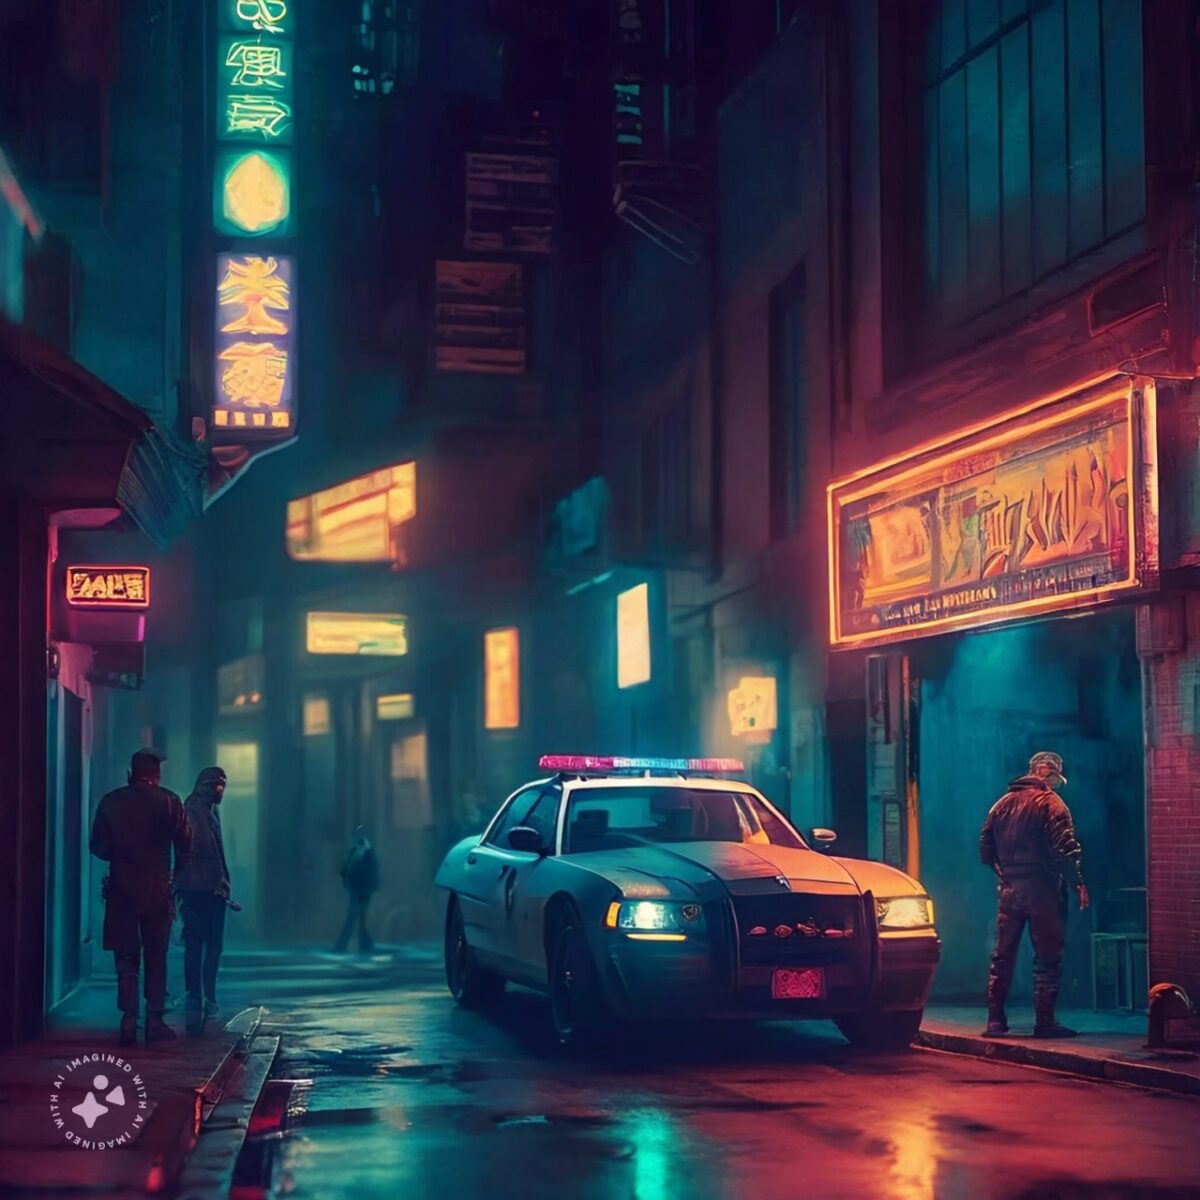 A shady backalley in a cyberpunk setting with neon lights advertisement some people hanging out and a futuristic police car on the street scaled